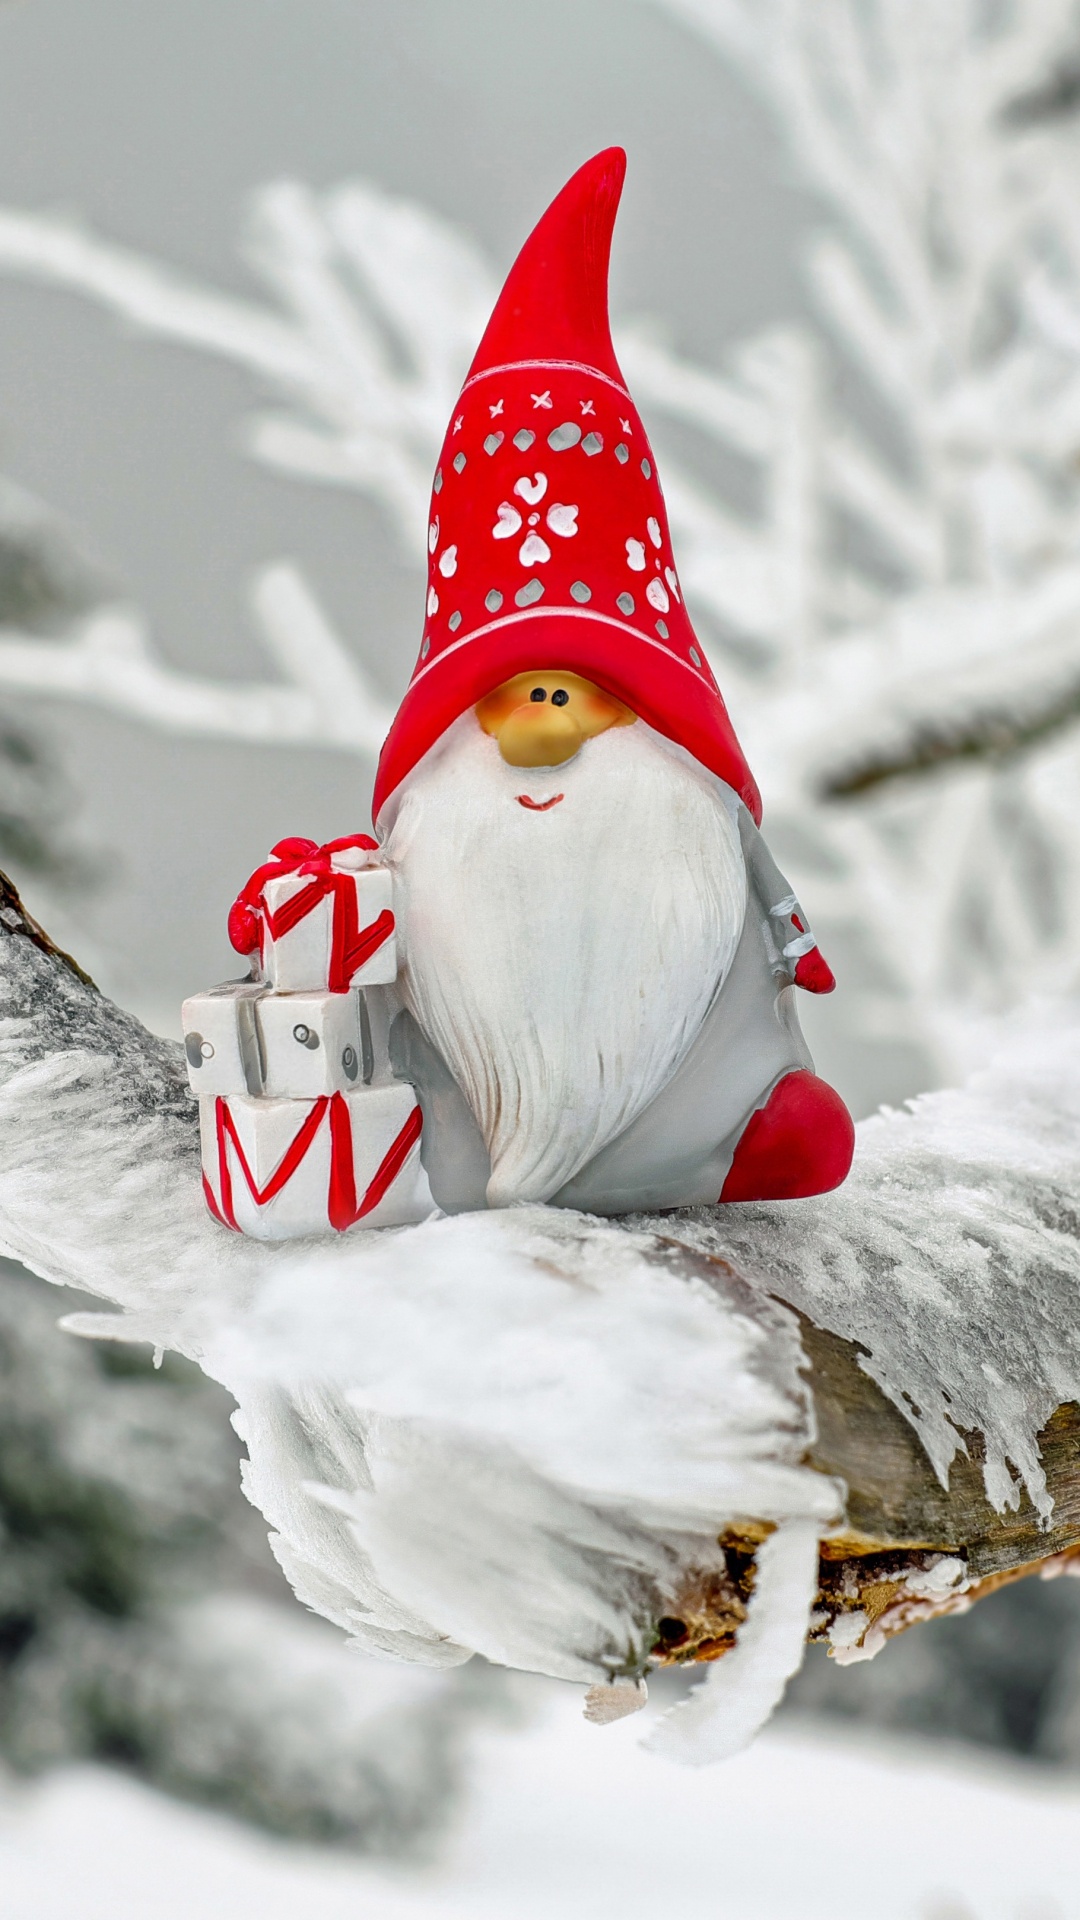 Santa Claus, Christmas Day, Winter, Snow, Freezing. Wallpaper in 1080x1920 Resolution